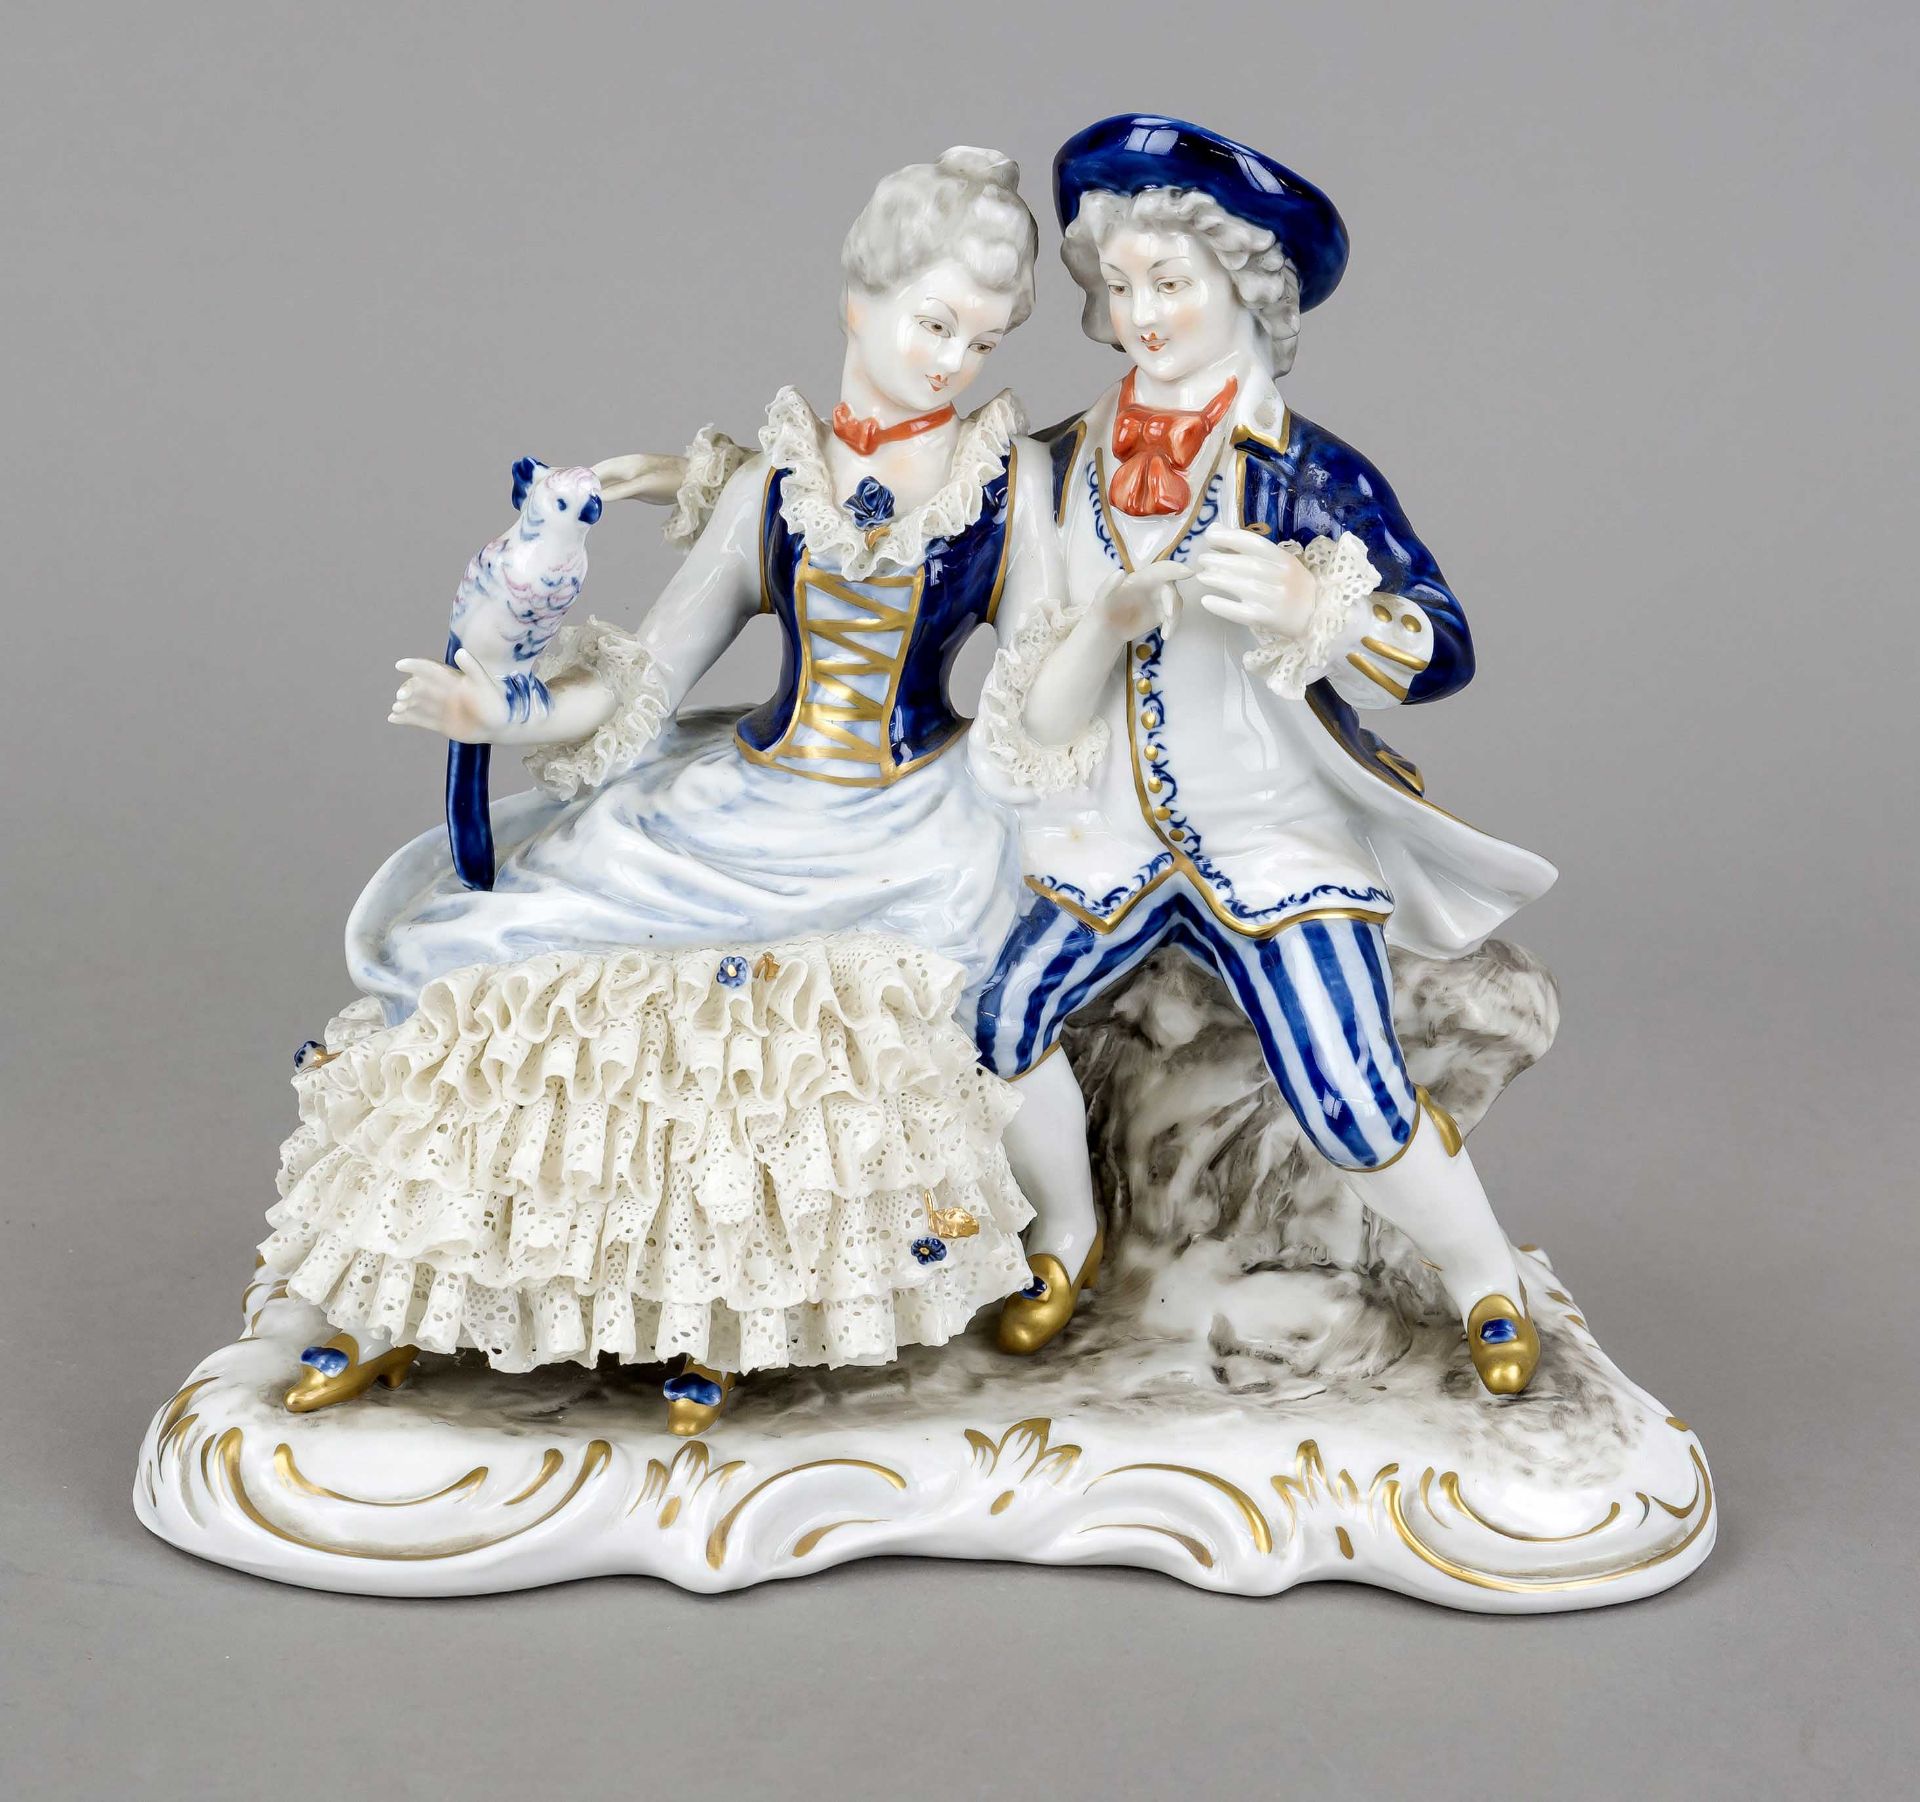 Elegant couple with parrot, Unterweißbach, Thuringia, 20th century, elegant lady in rococo dress